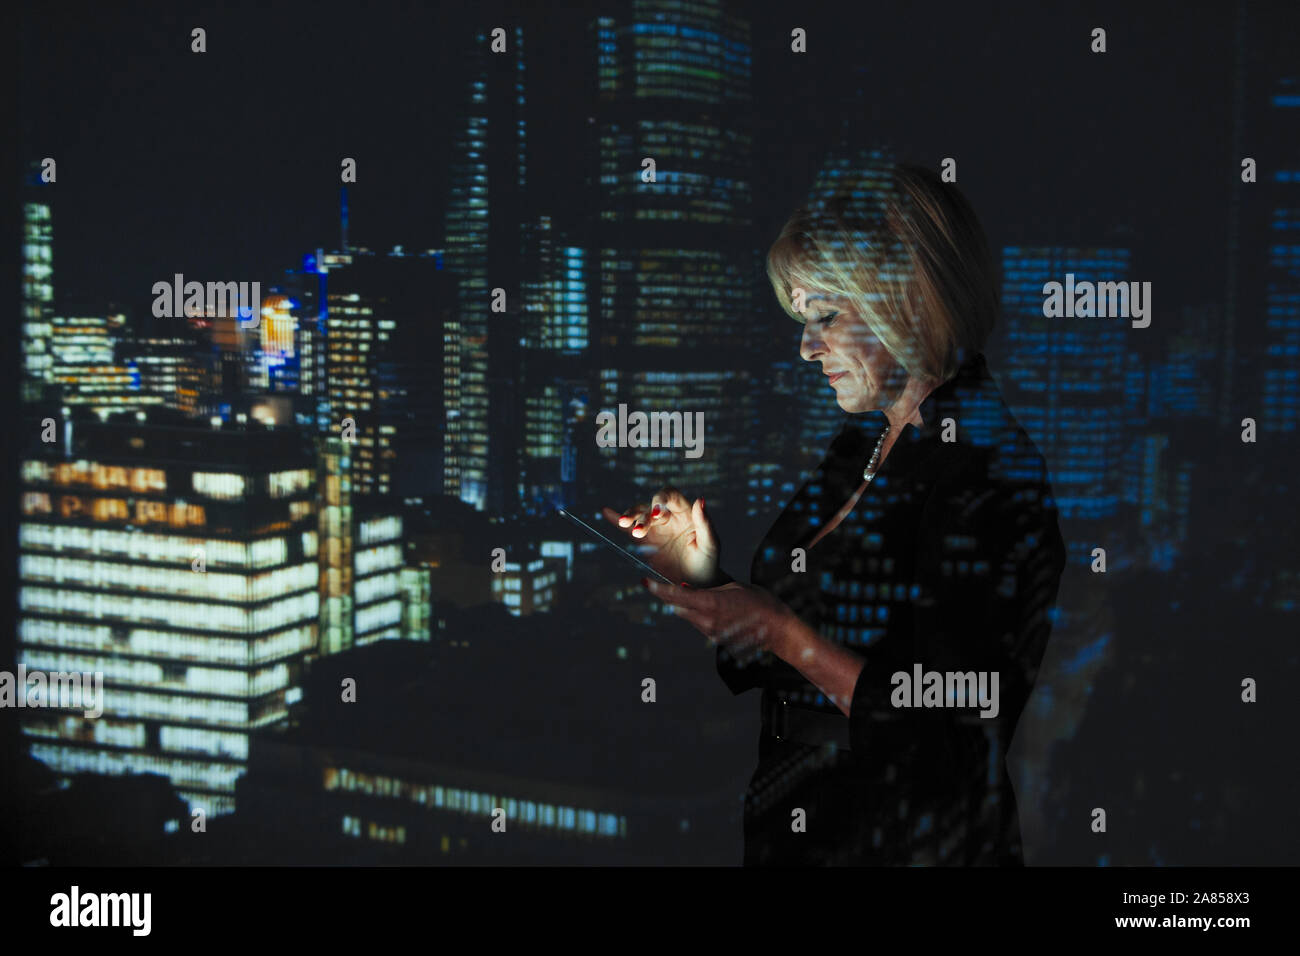 Double exposure businesswoman using digital tablet against highrise lights at night Stock Photo